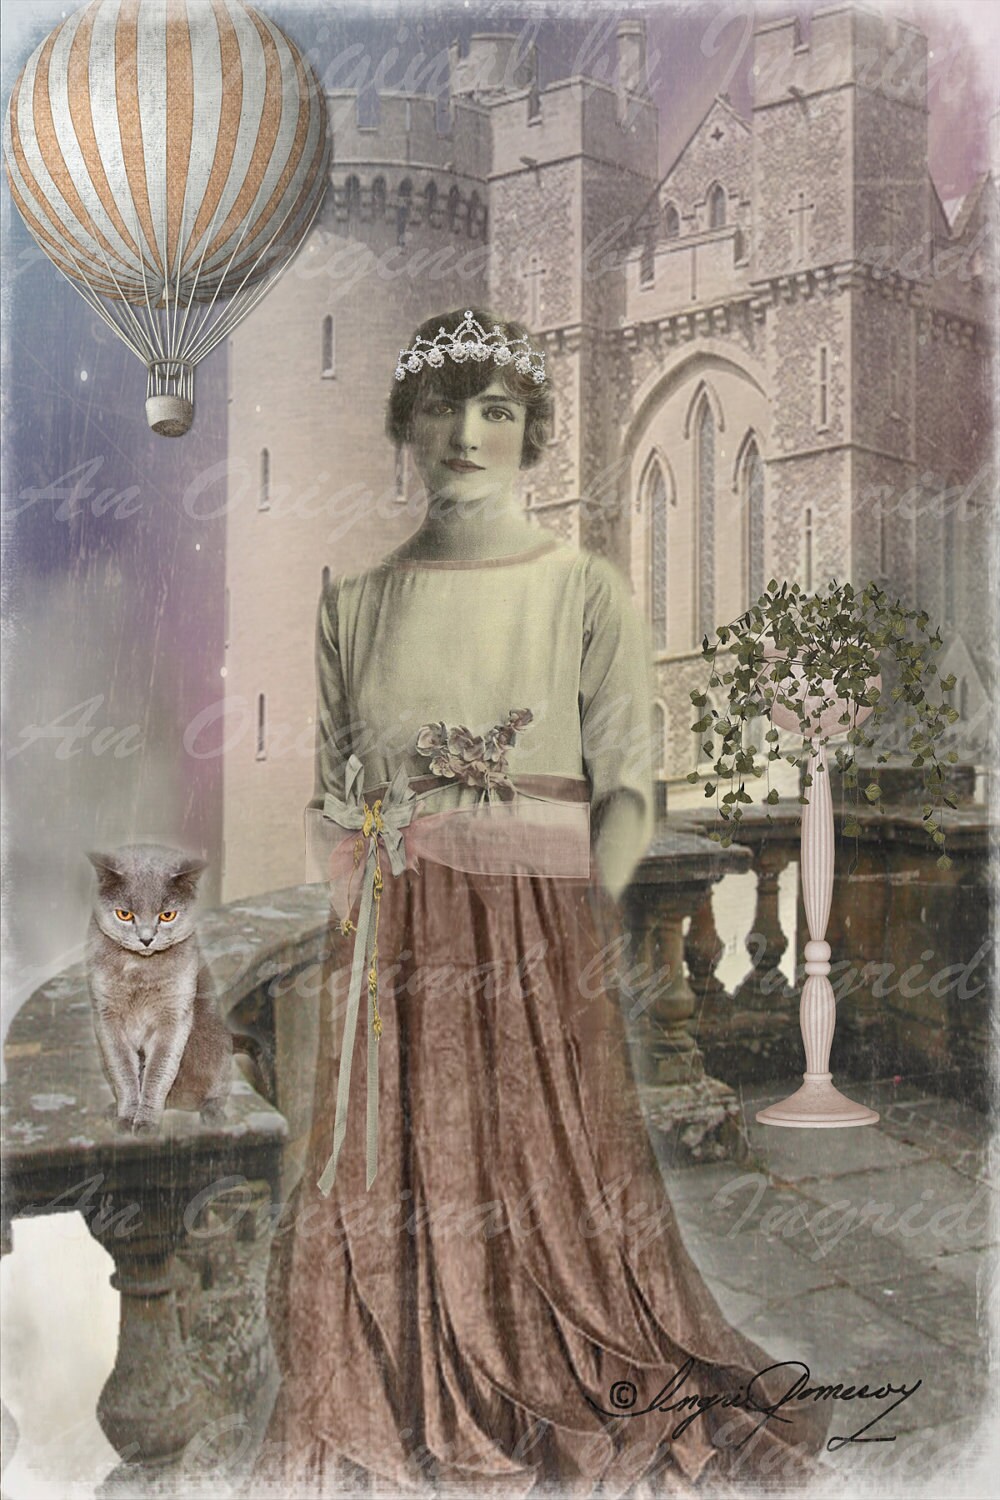 Terrace Princess Digital Collage Greeting Card (Suitable for Framing)